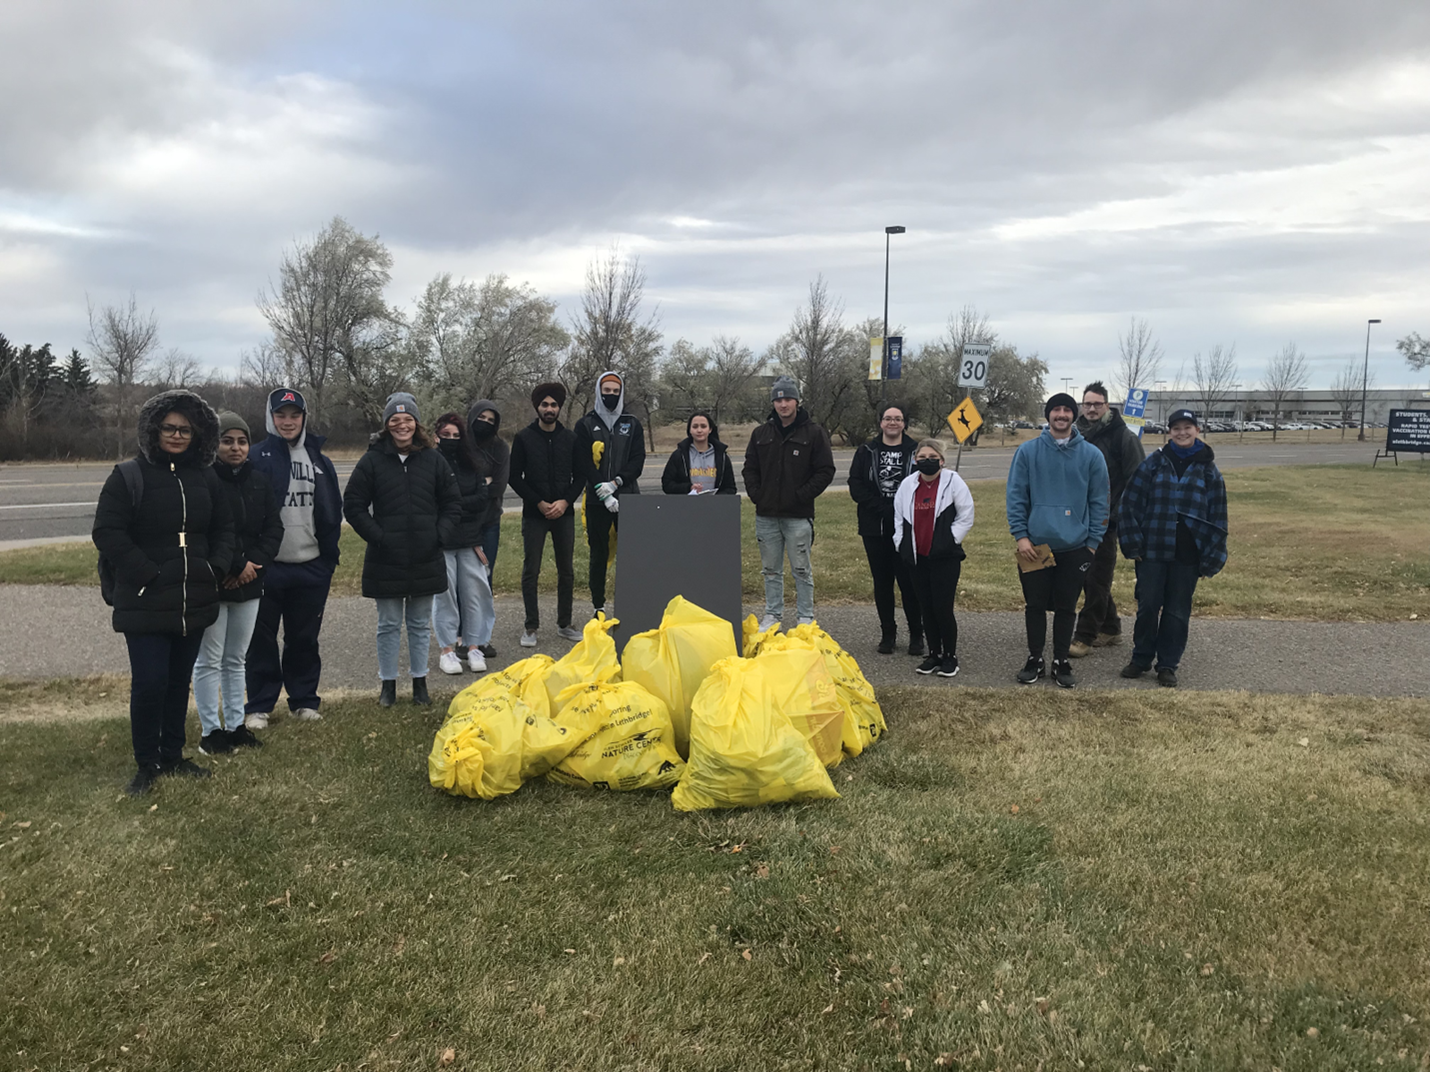 a group of people pose in front of several large yellow garbage bags